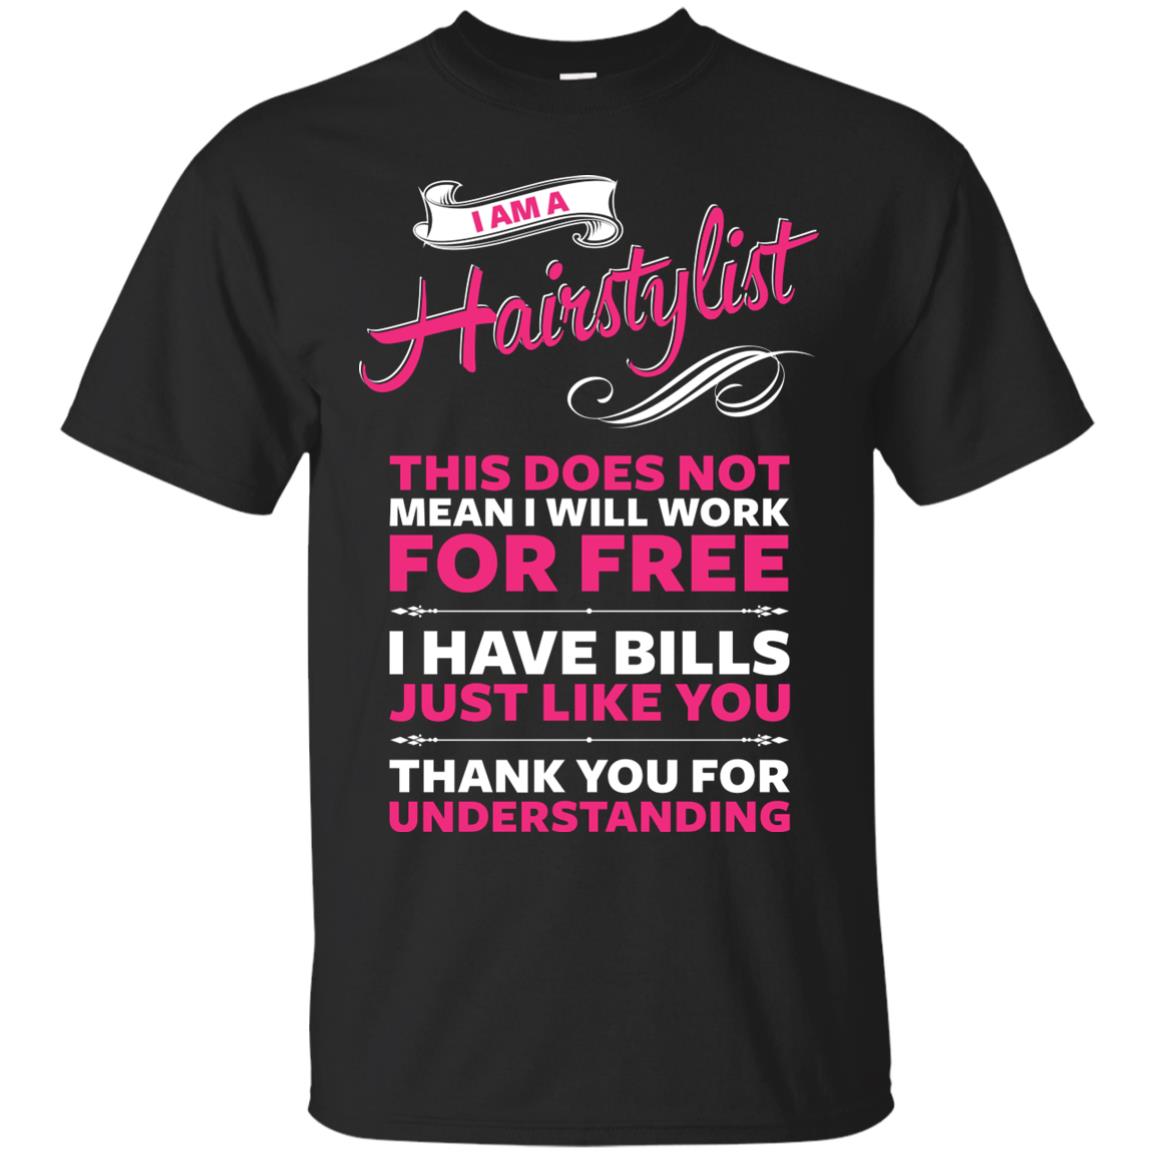 Not For Free - Apparel